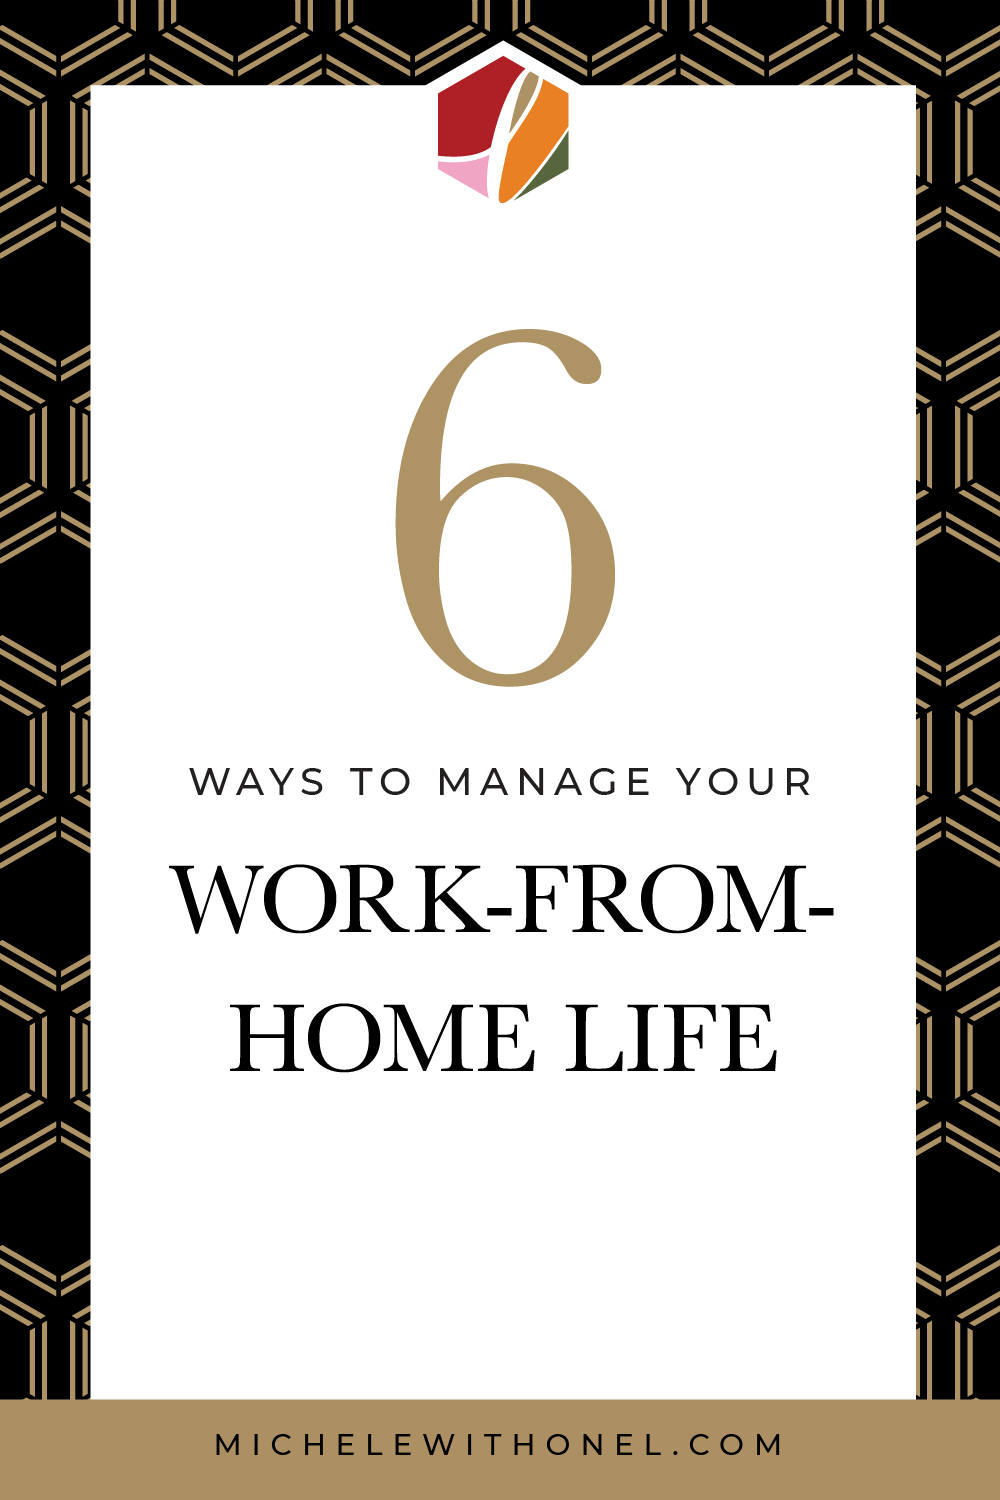 Are you new to working at home? If so, these 6 WFH Tips offer practical advice for running a home-based business. Read now to find out ways to manager your work-life balance and get a head start on time blocking, scheduling your days, and even having a snack strategy! #wfh #workfromhome #smallbusinesstips #entreprenuer